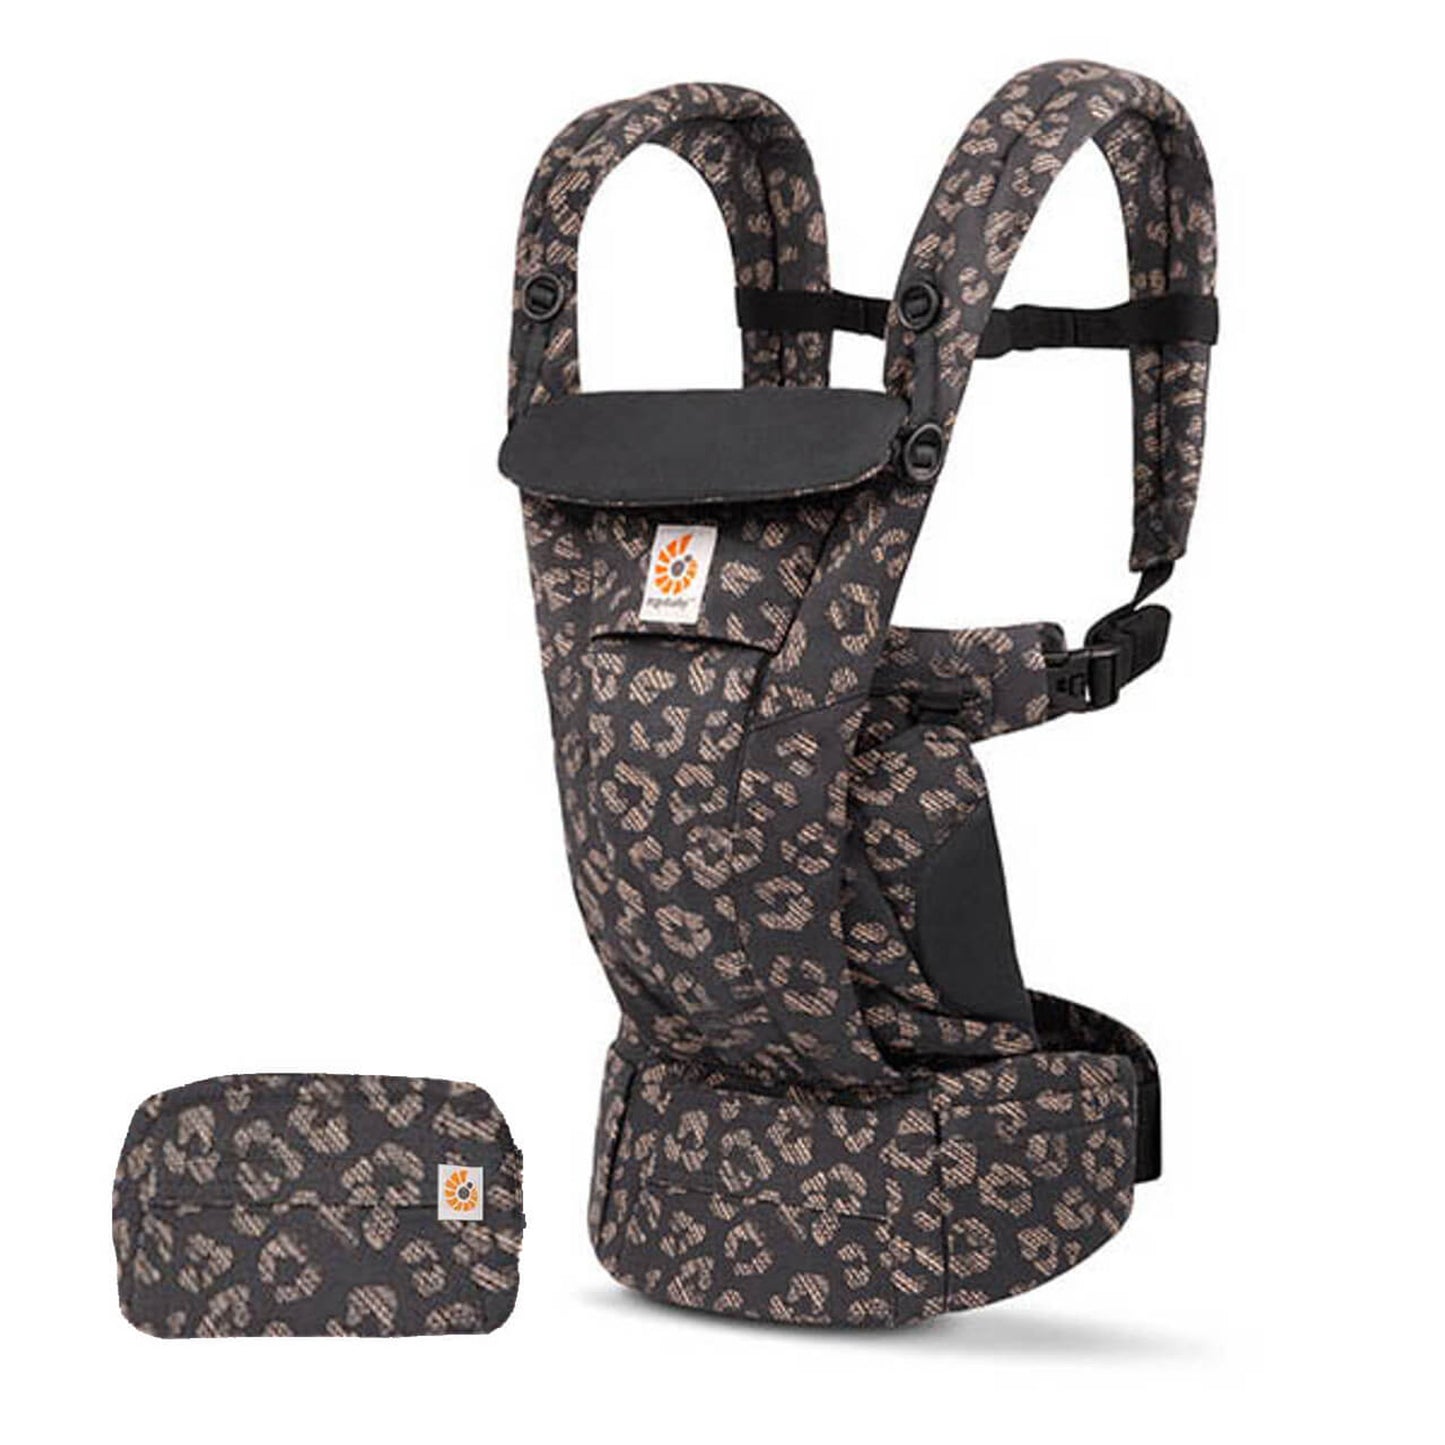 Ergobaby Omni Dream Baby Carrier | Black Leopard & All Weather Cover